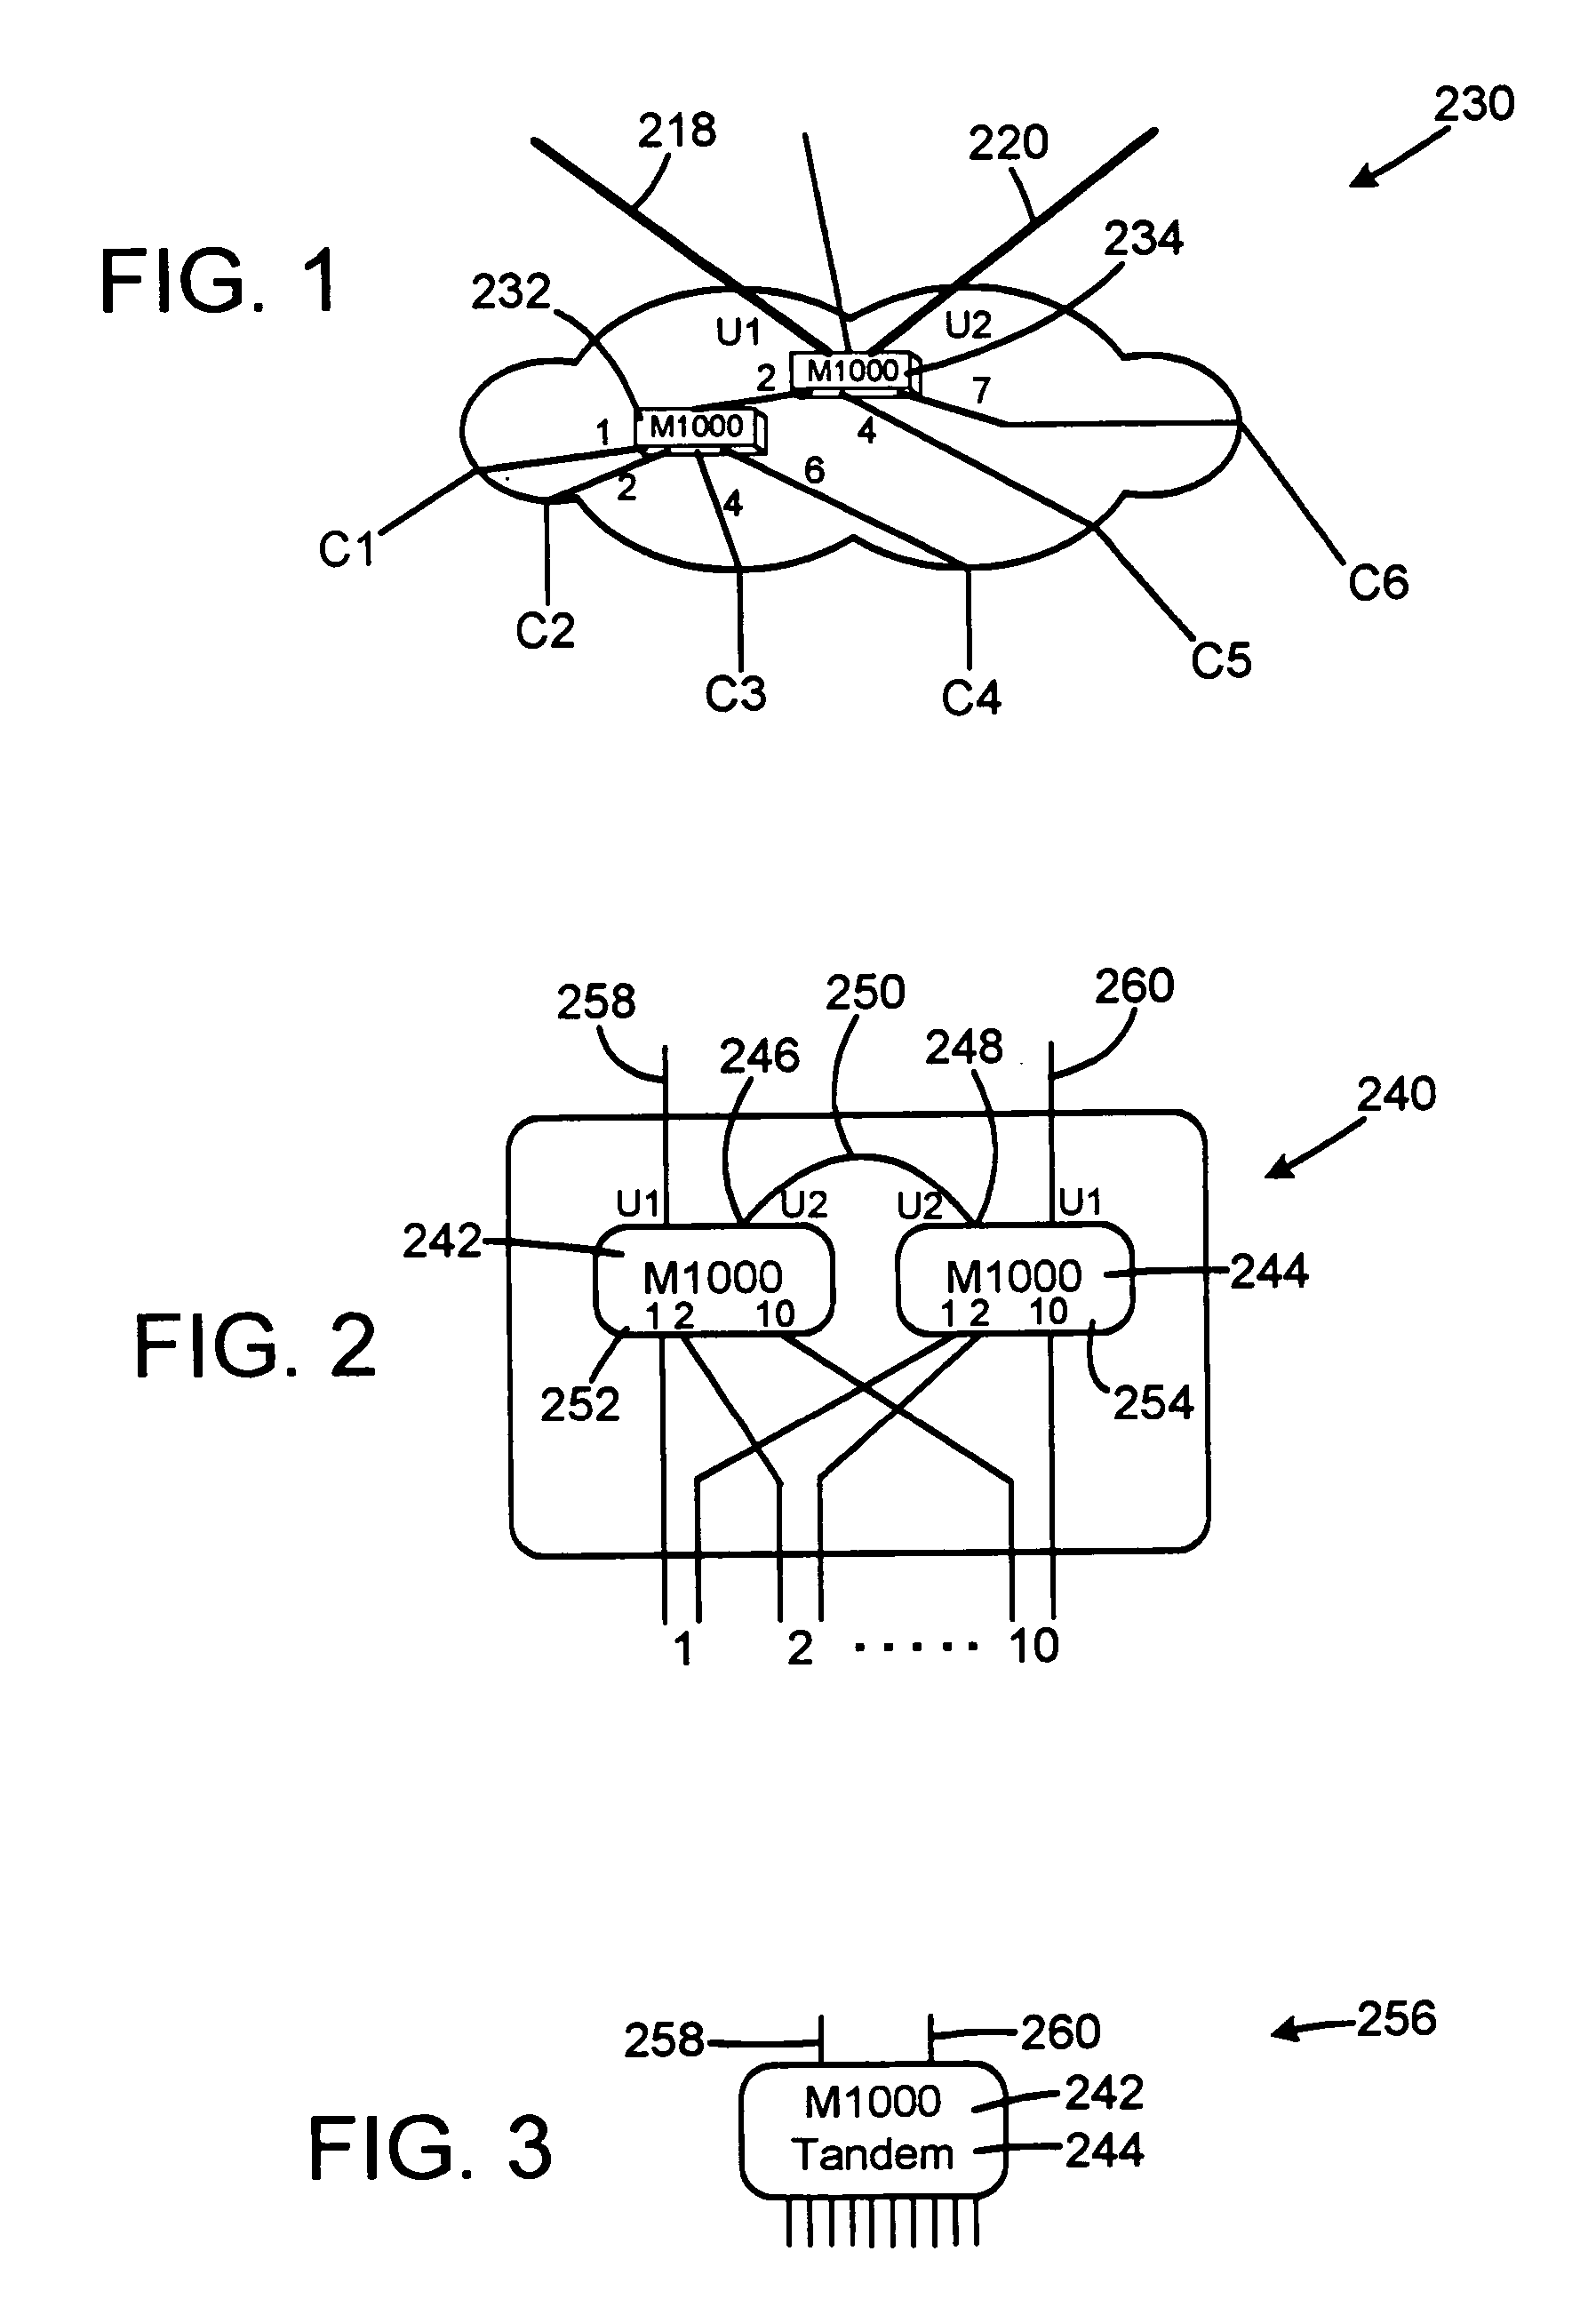 Method of sending information through a tree and ring topology of a network system